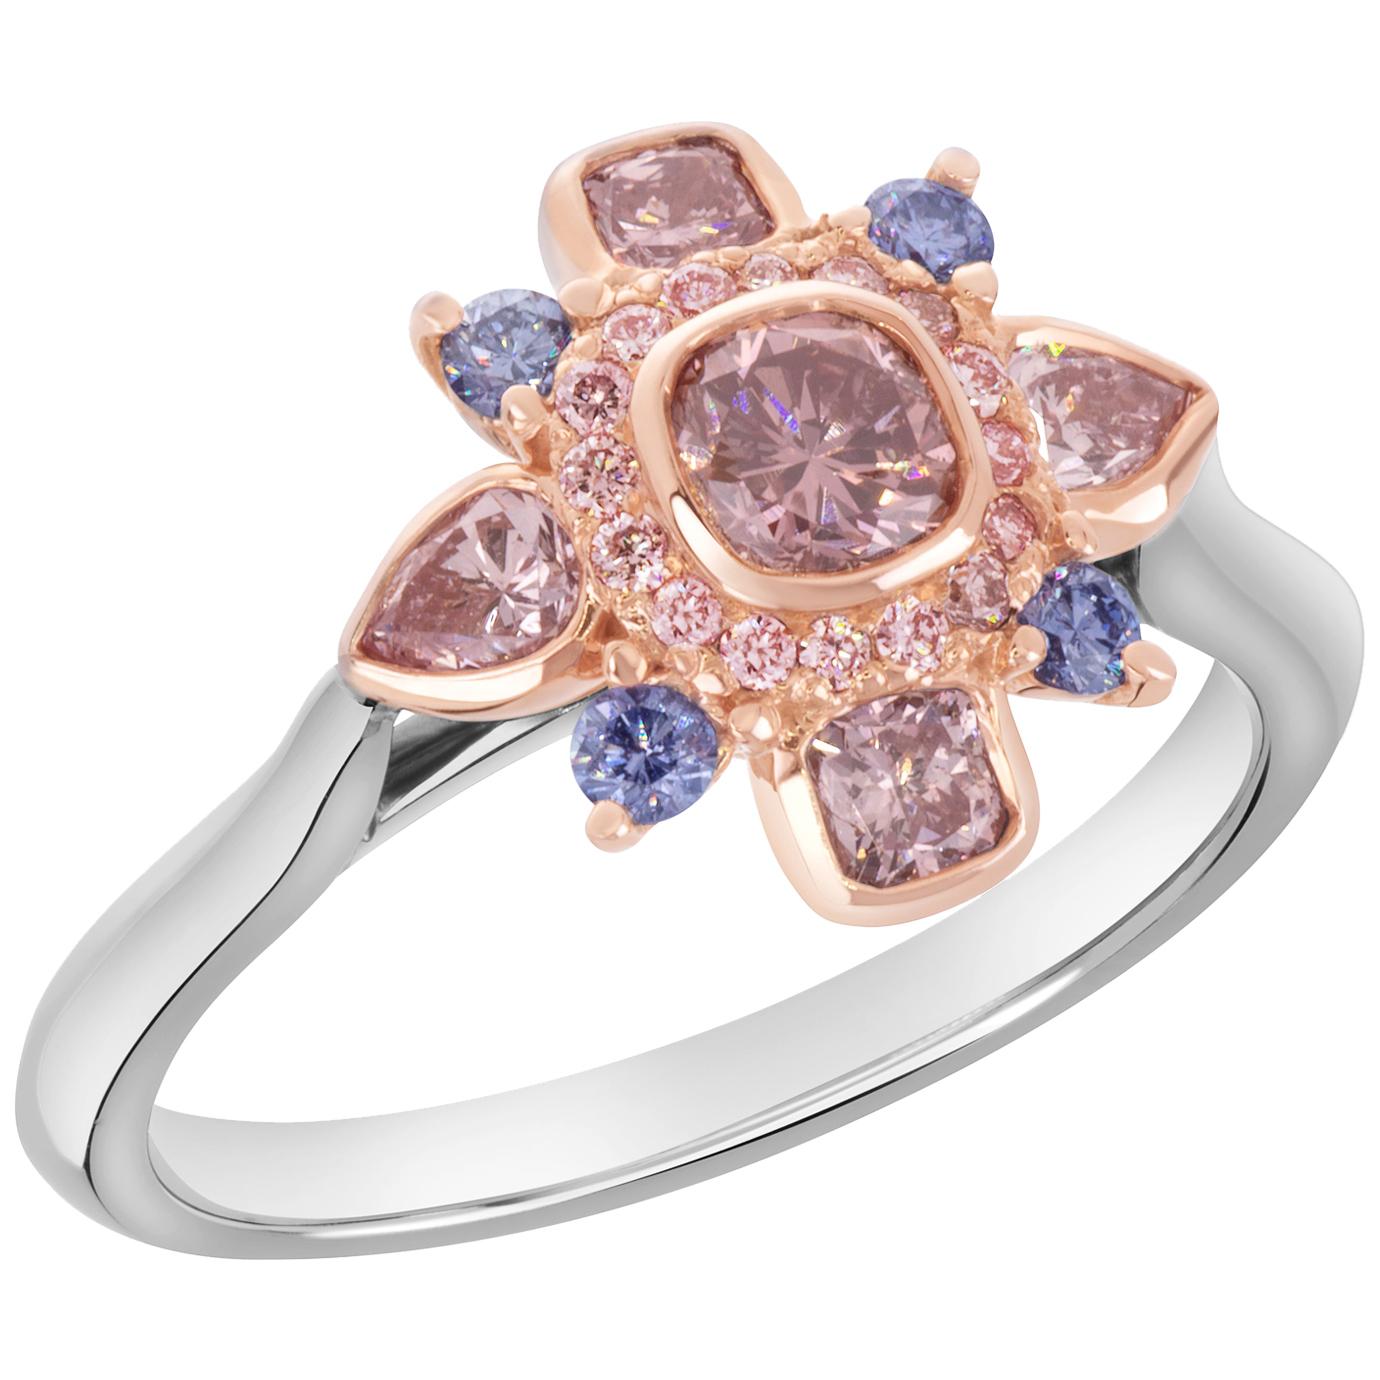 GIA Certified 0.27 Carat Pink Diamond Accented by Rare Violets and Pink Diamond  For Sale